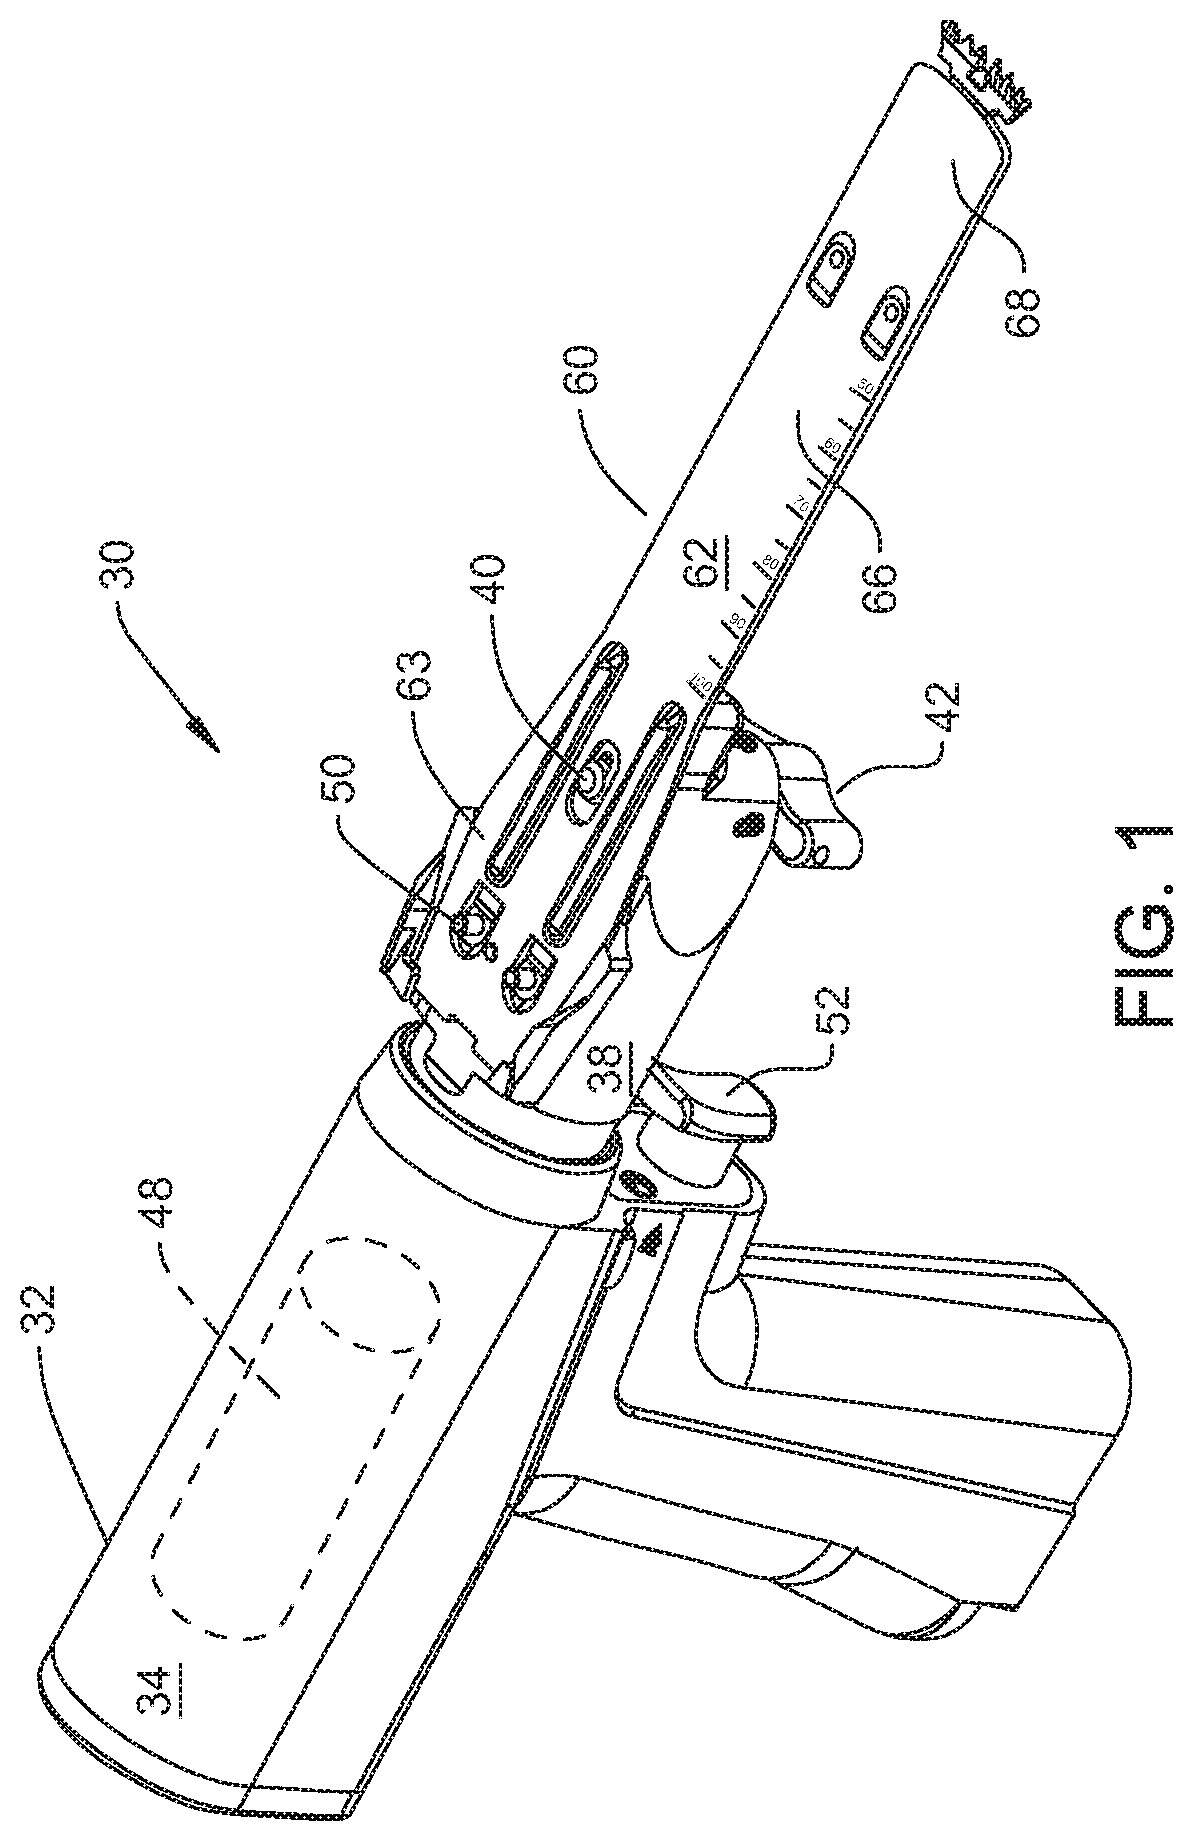 Surgical Sagittal Blade Cartridge With A Reinforced Guide Bar